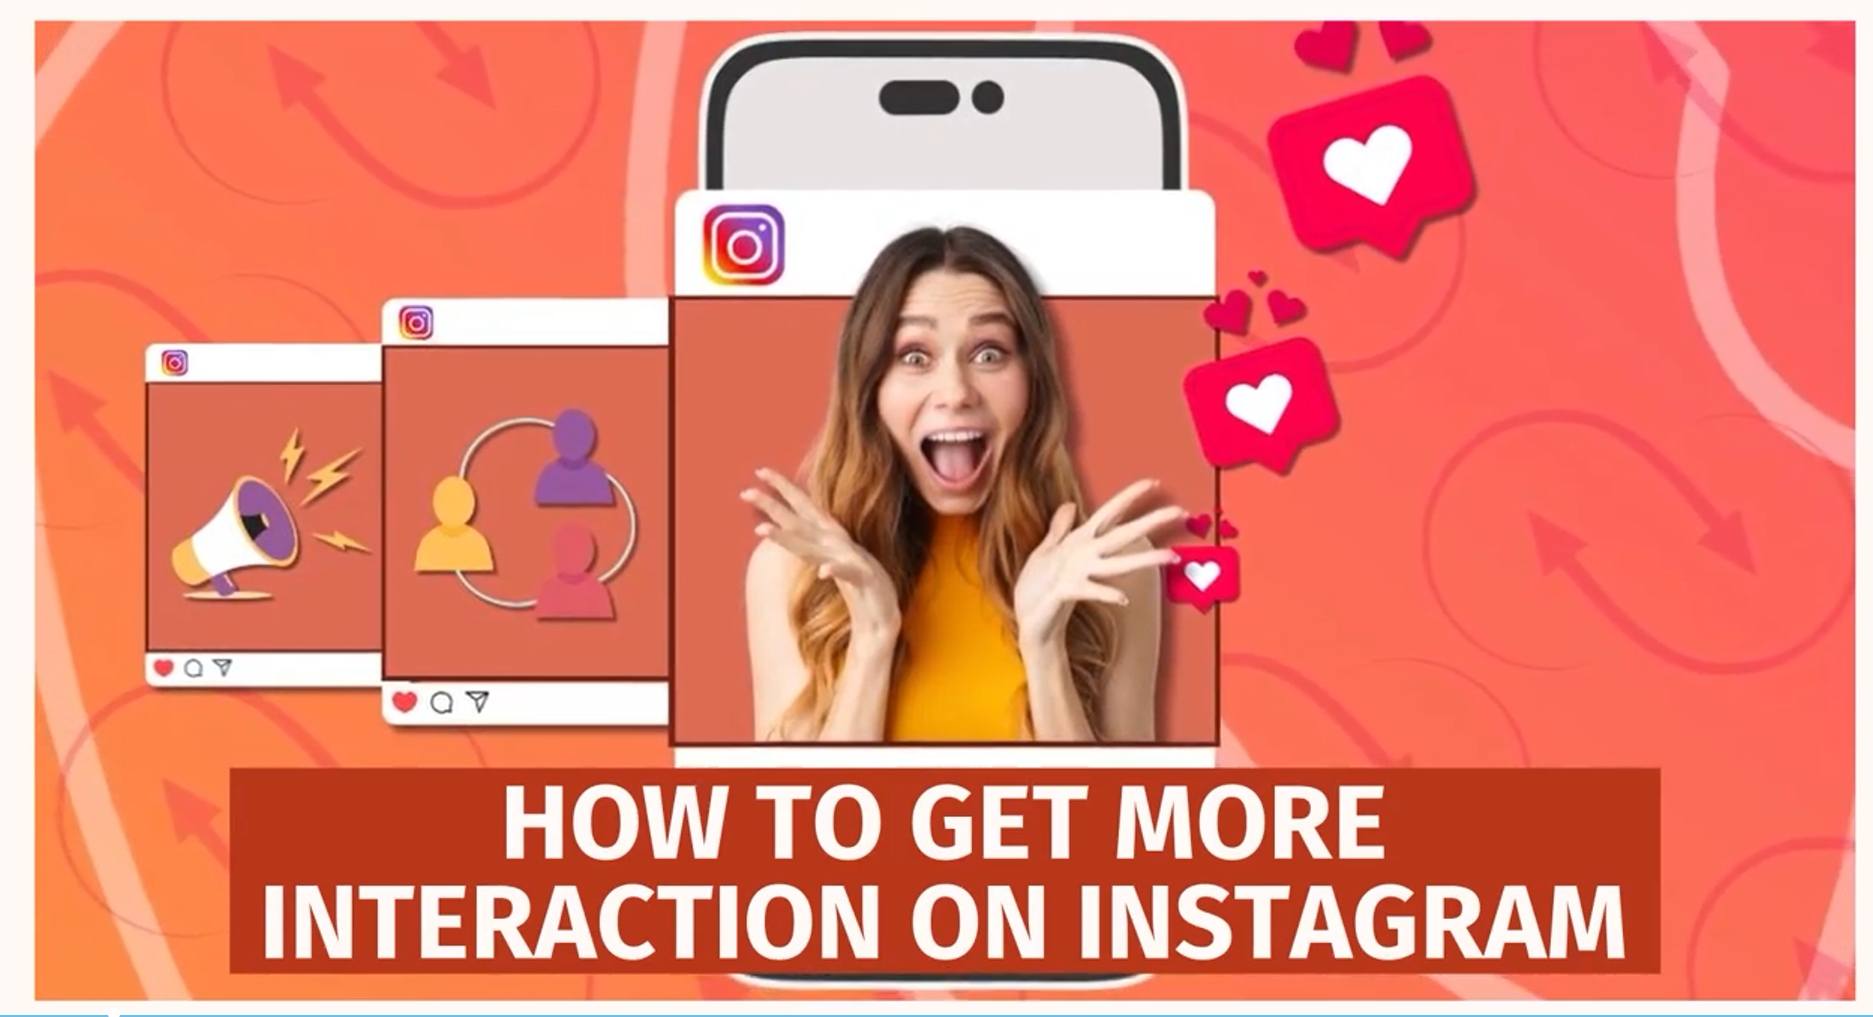 How to Get More Interaction on Instagram